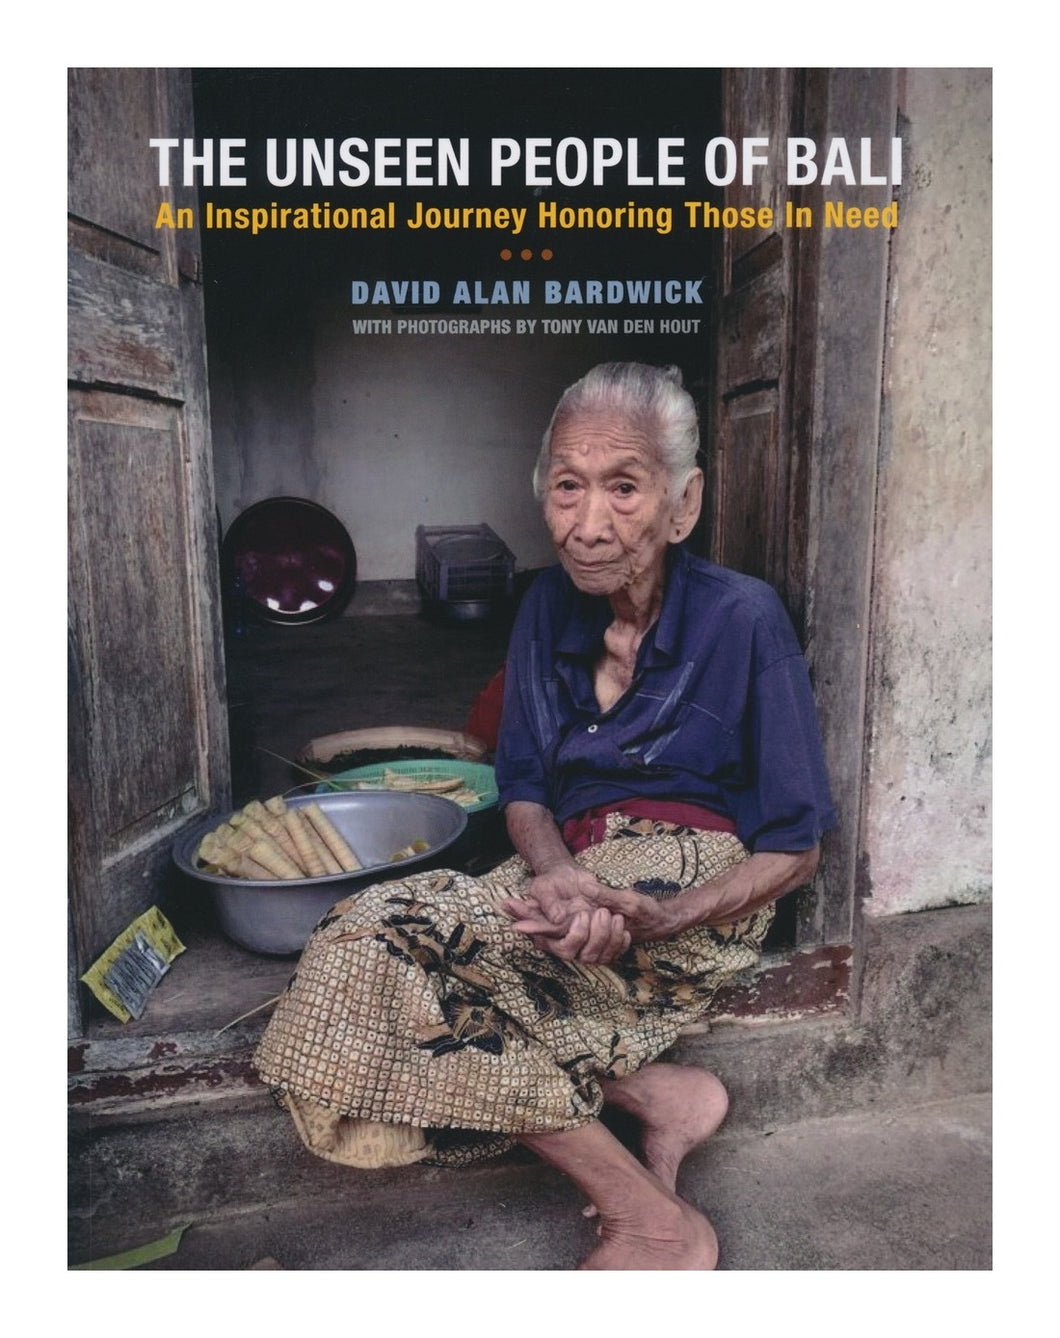 The Unseen People of Bali